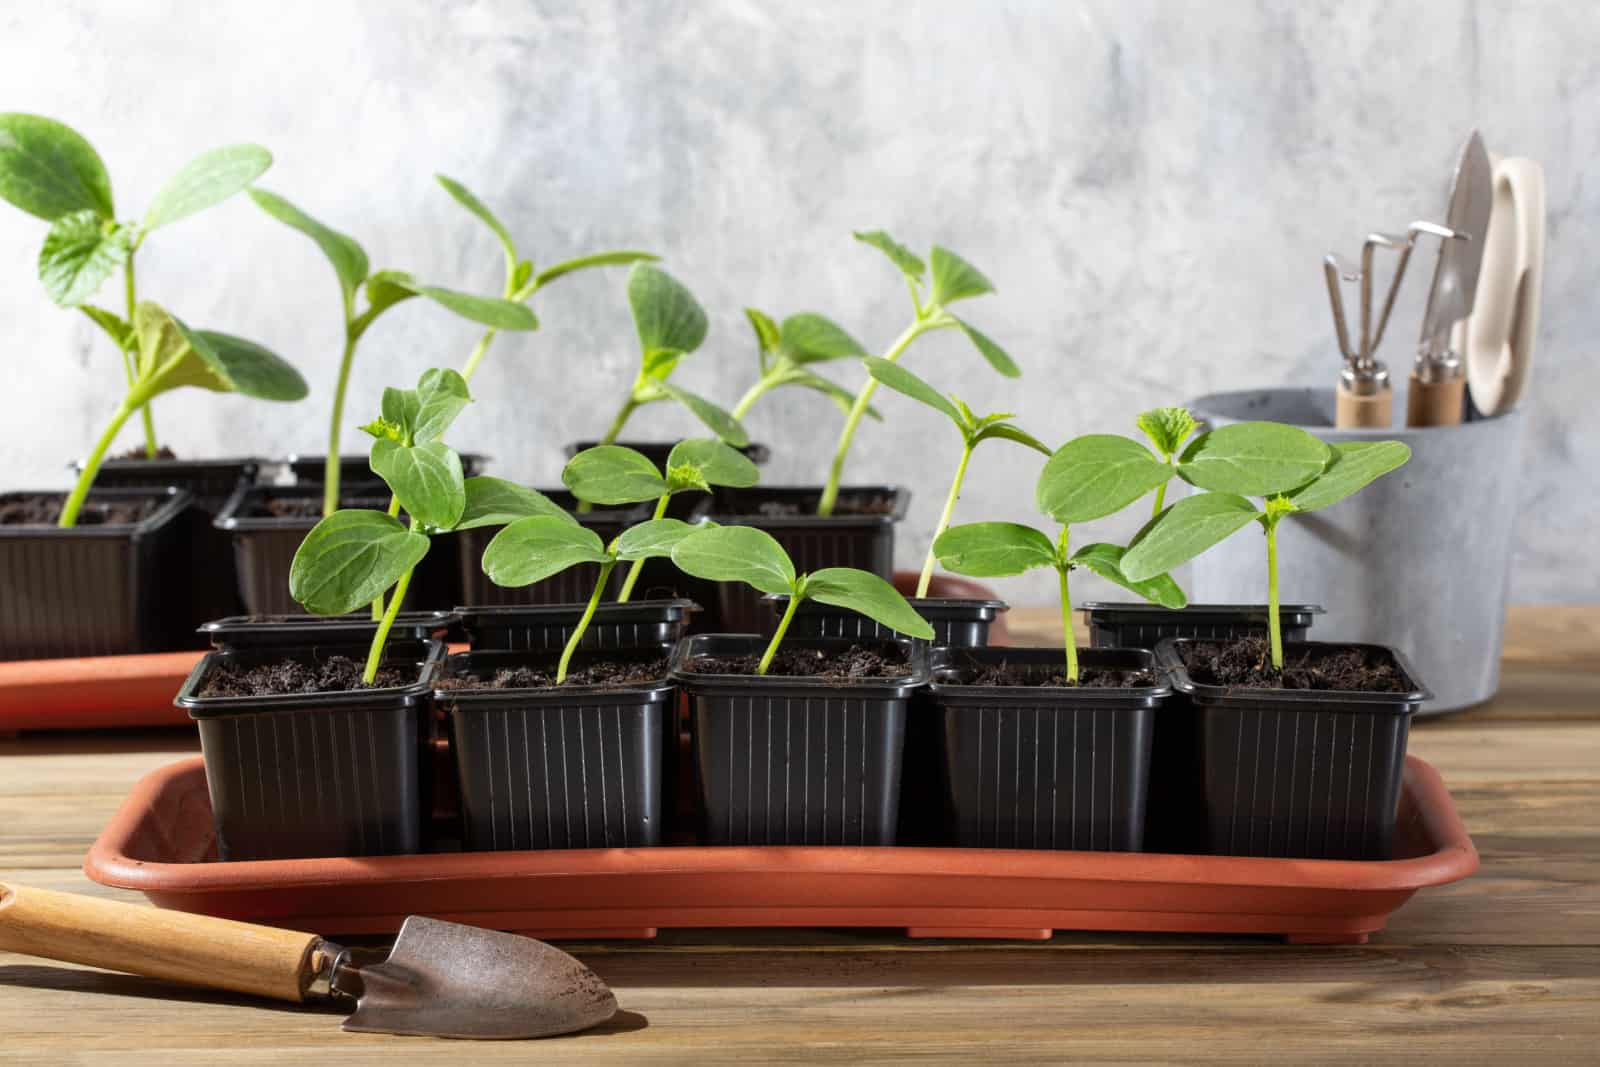 Young cucumber seedlings growing in plastic pots